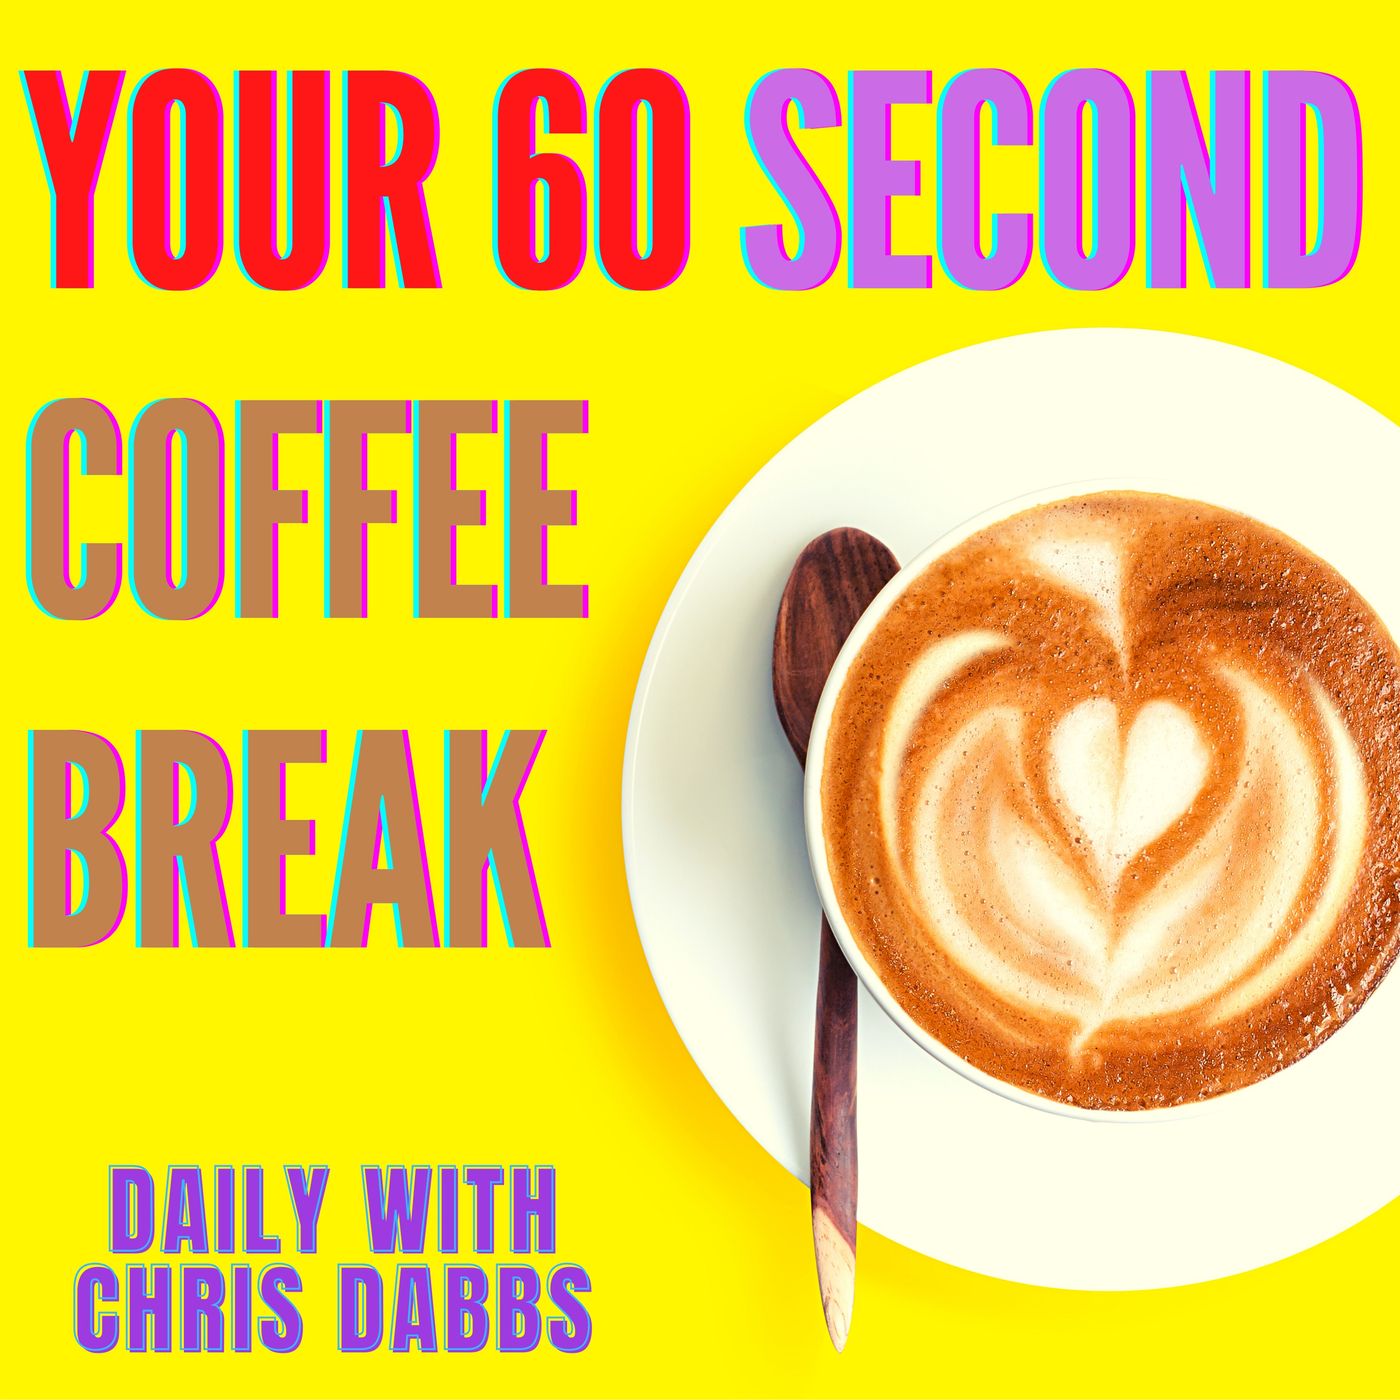 Your 60 Second Coffee Break with Chris Dabbs - Episode 56 Image